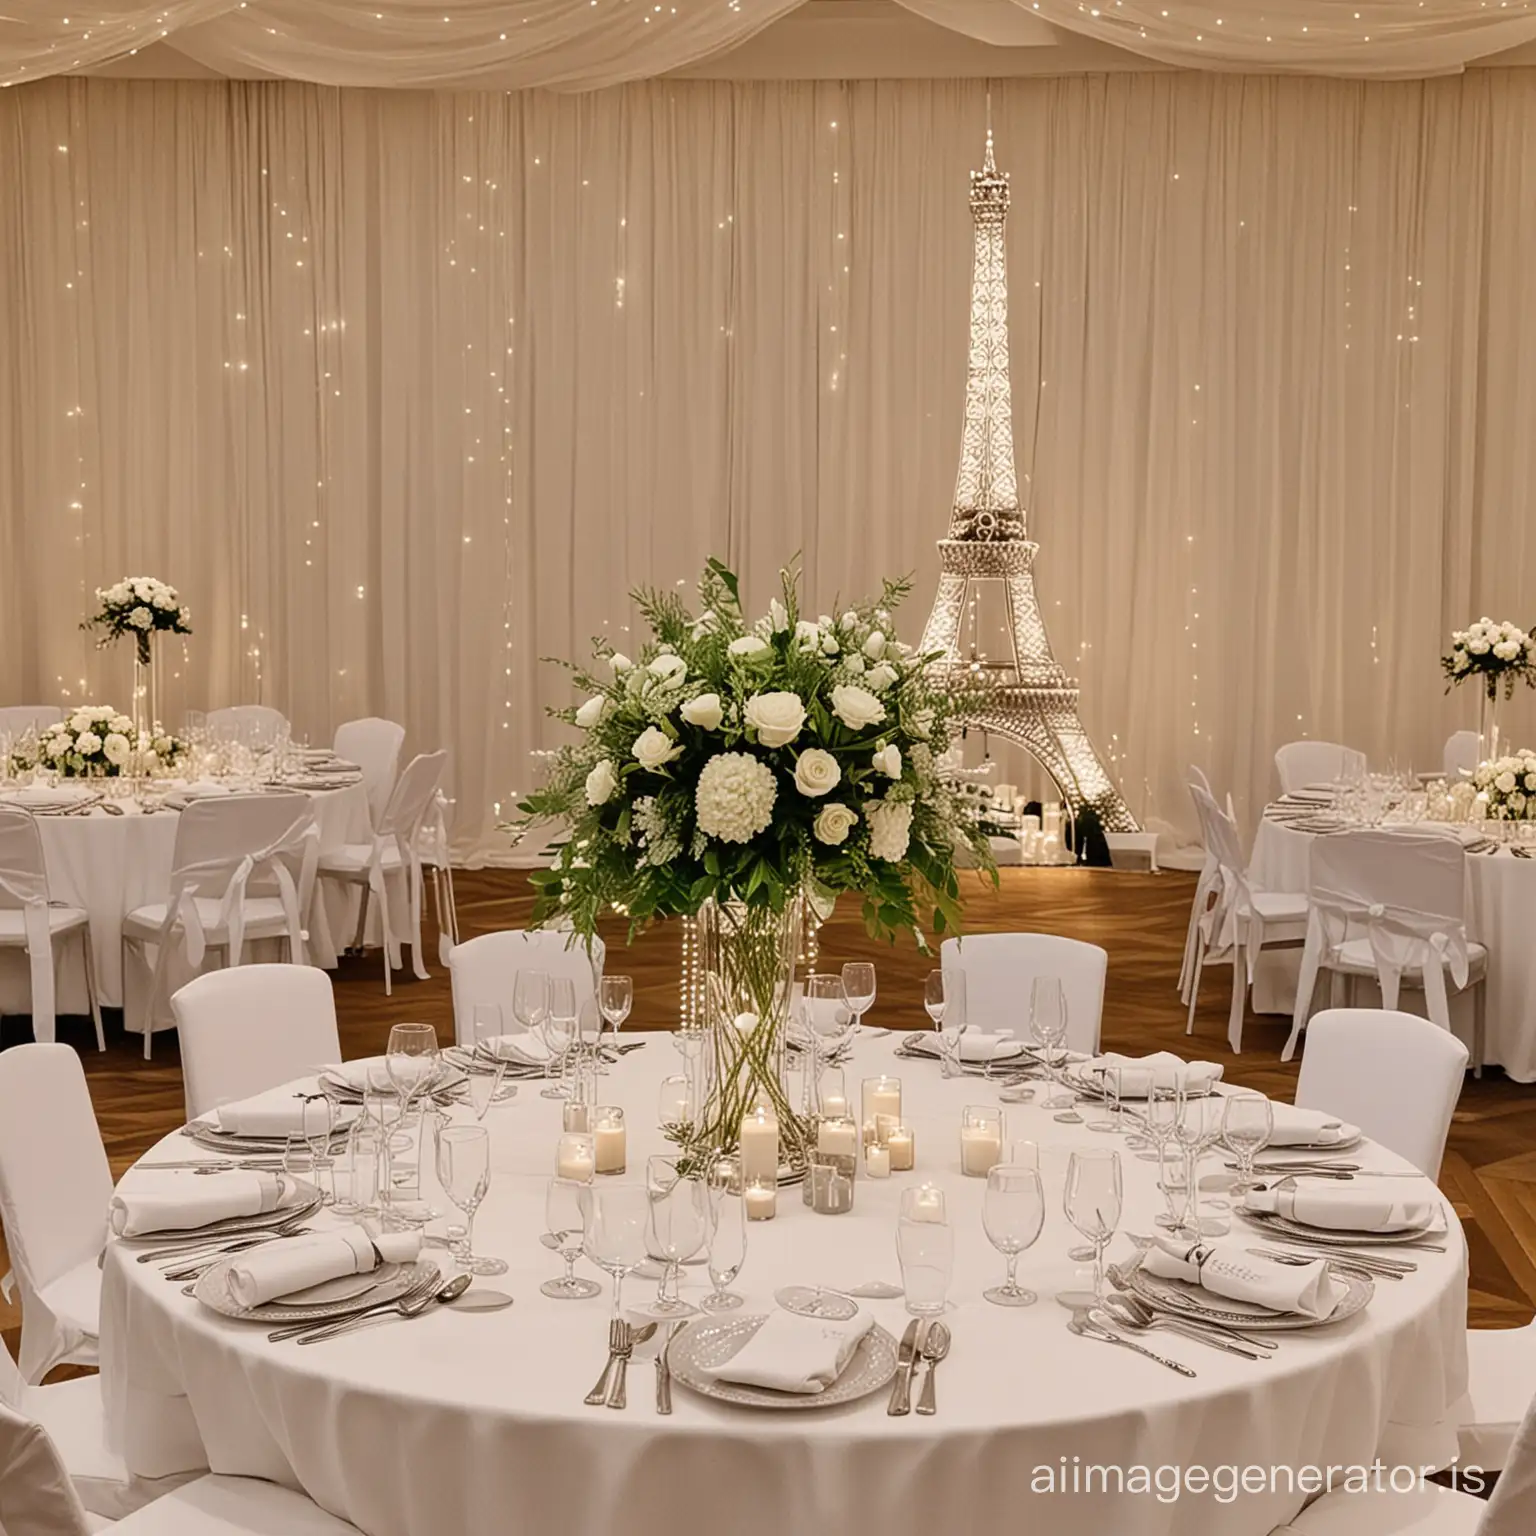 Elegant-Round-Wedding-Table-with-White-Eiffel-Tower-Vase-and-Fairy-Lights